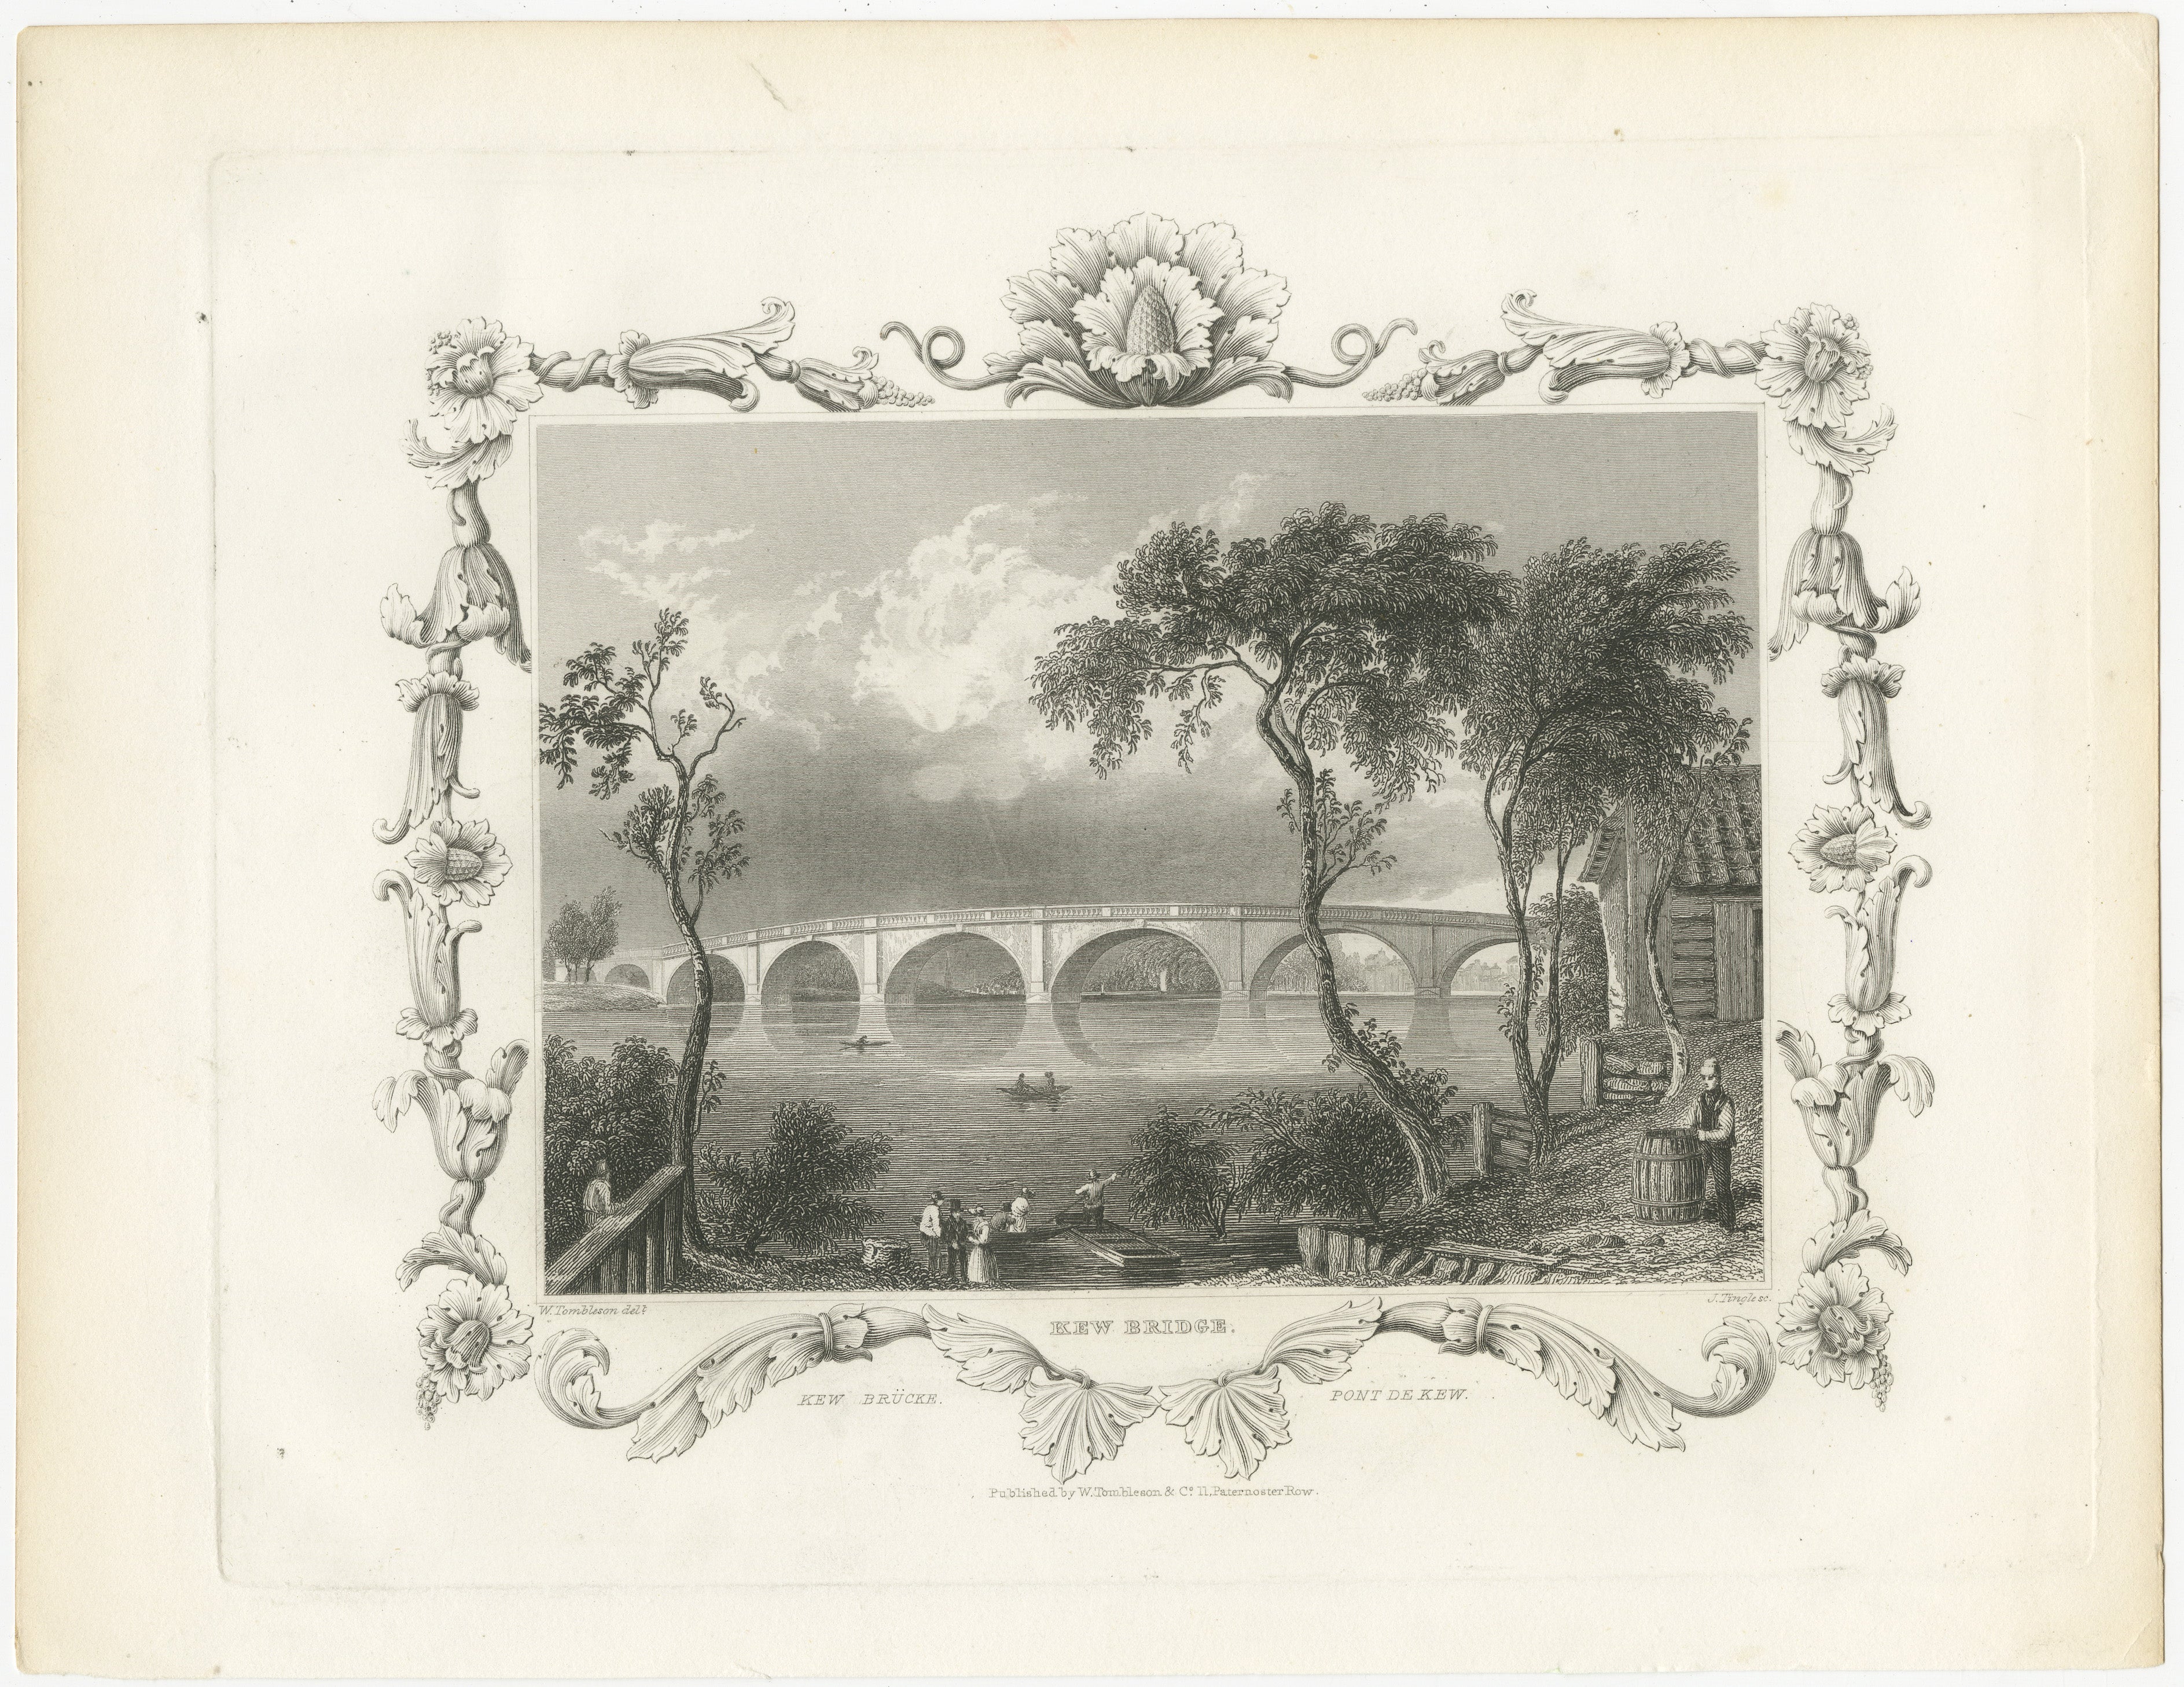 This steel engraving is a charming portrayal of Kew Bridge over the River Thames, as visualized by the artist J. Tingle after an original by William Tombleson, dating back to around 1833. The image is steeped in tranquility, capturing the essence of